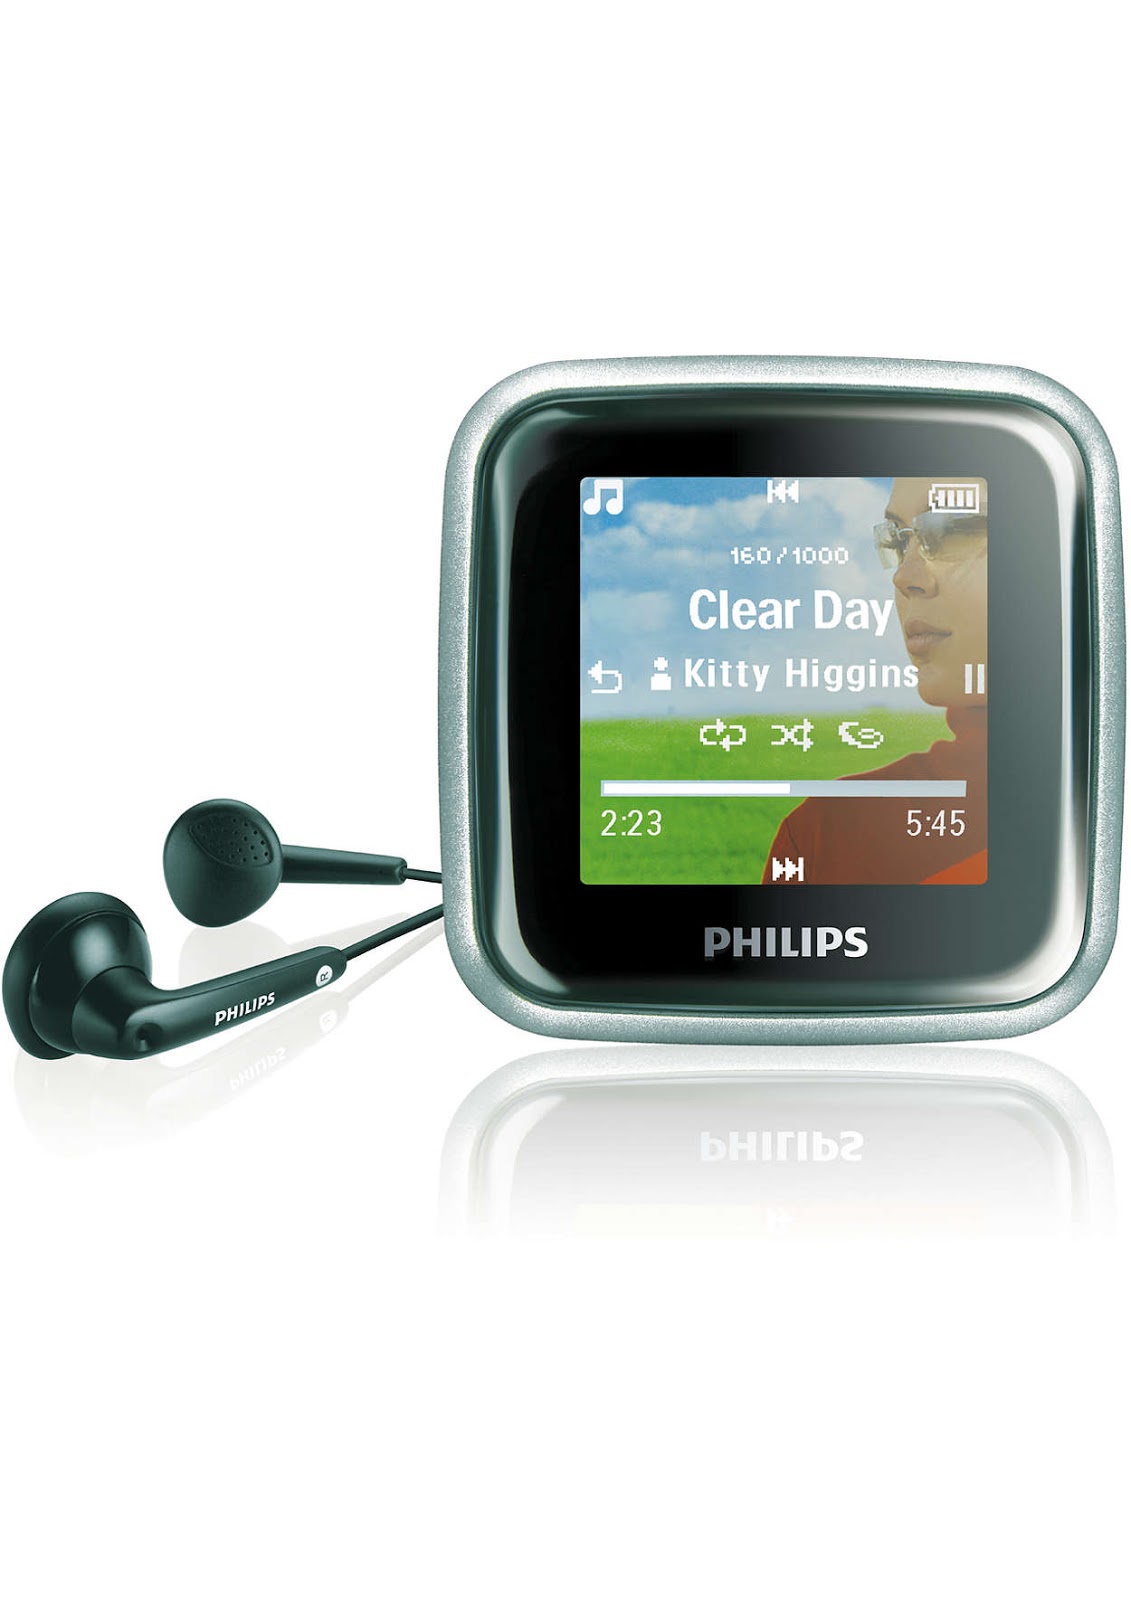 philips gogear 2gb mp3 player not reading mp3 files